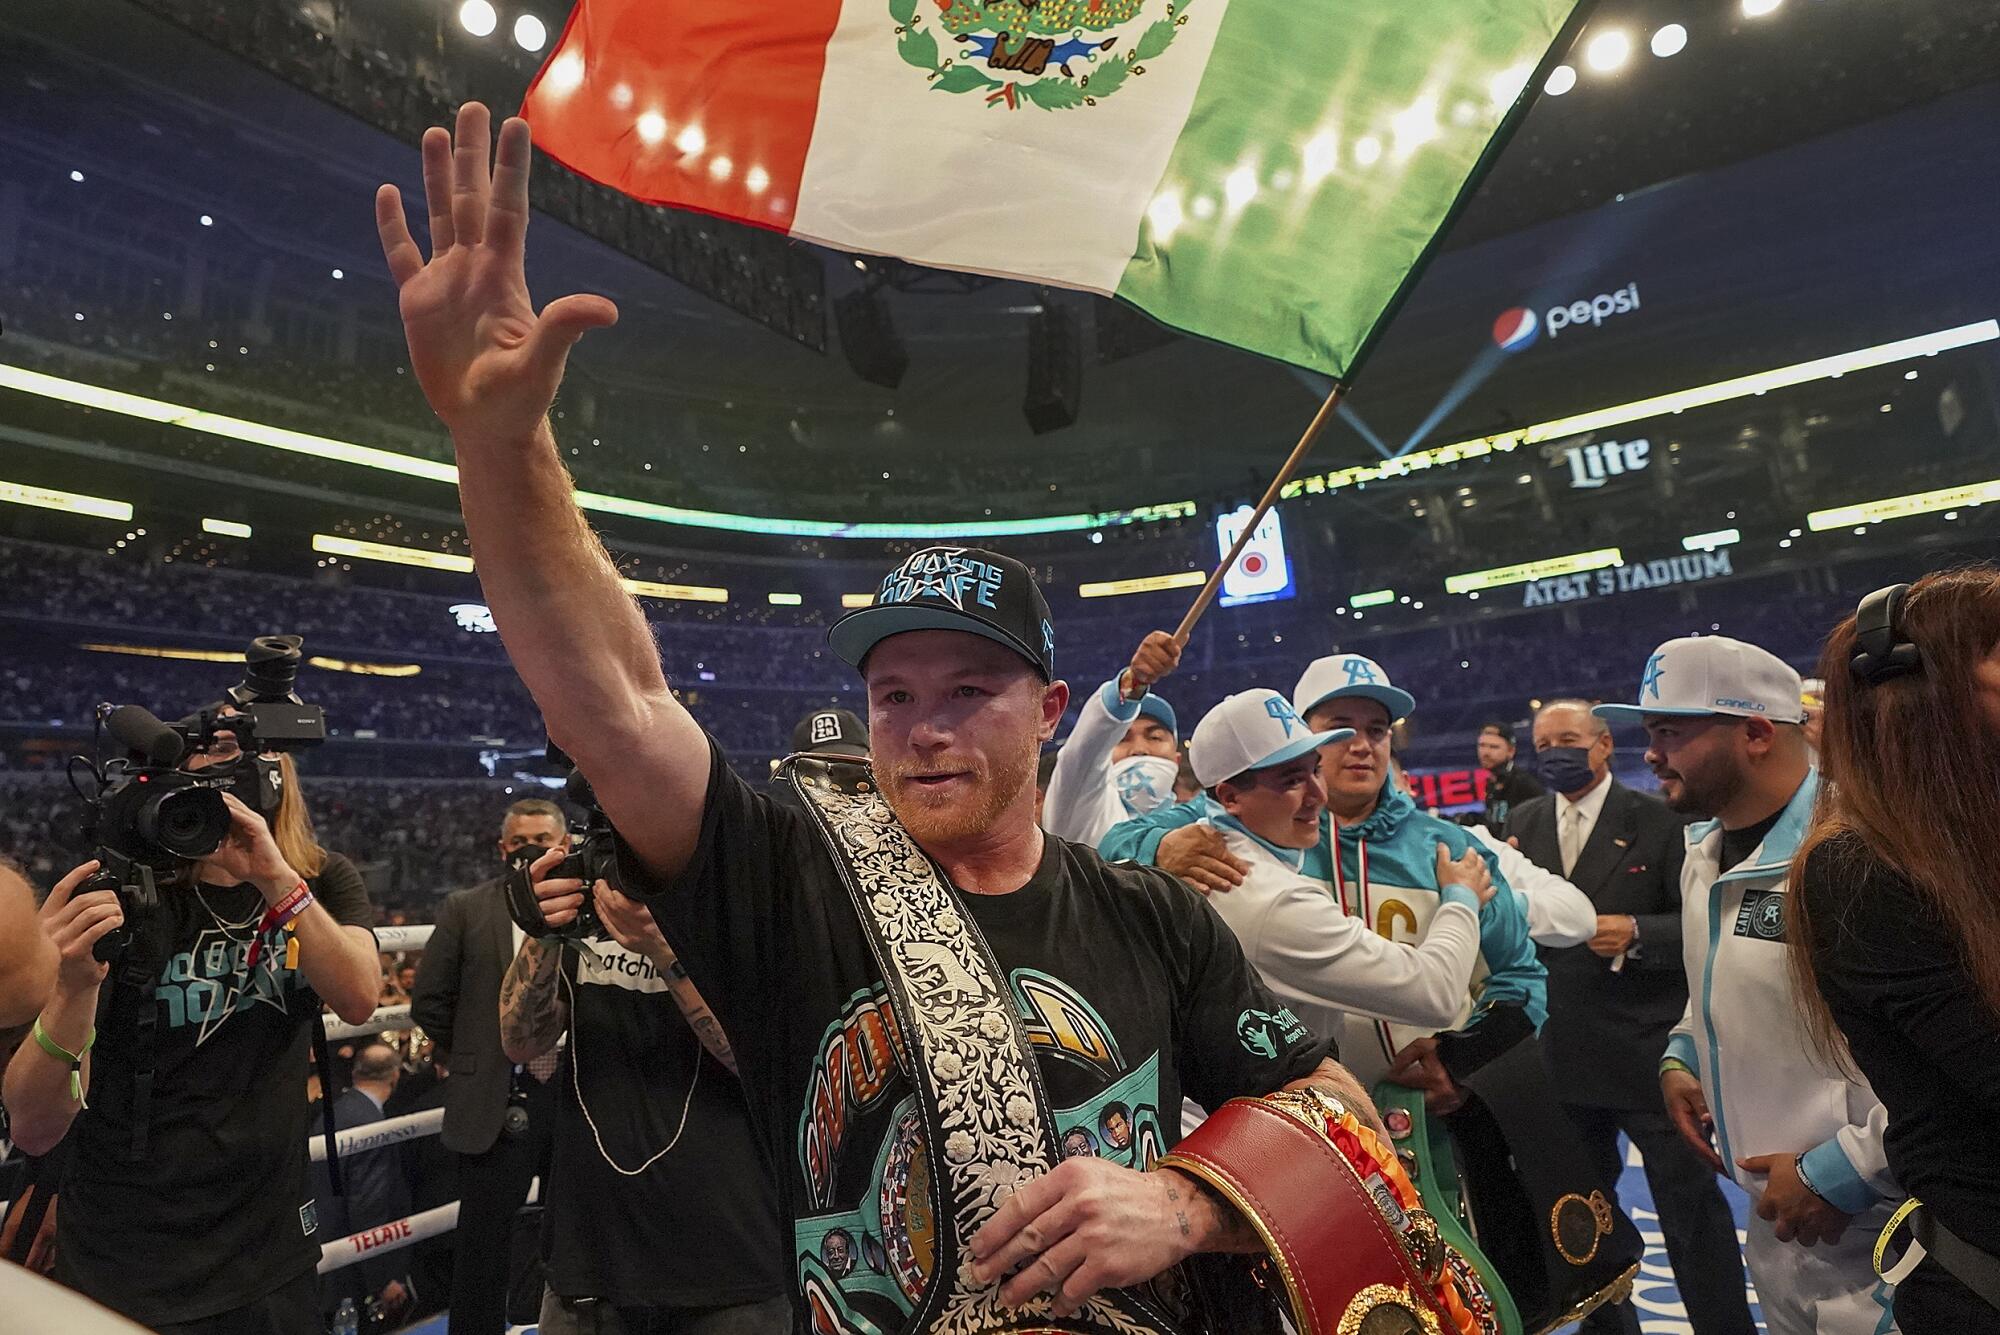 Canelo Álvarez carries his title belts in the ring as others take photos and mill around smiling